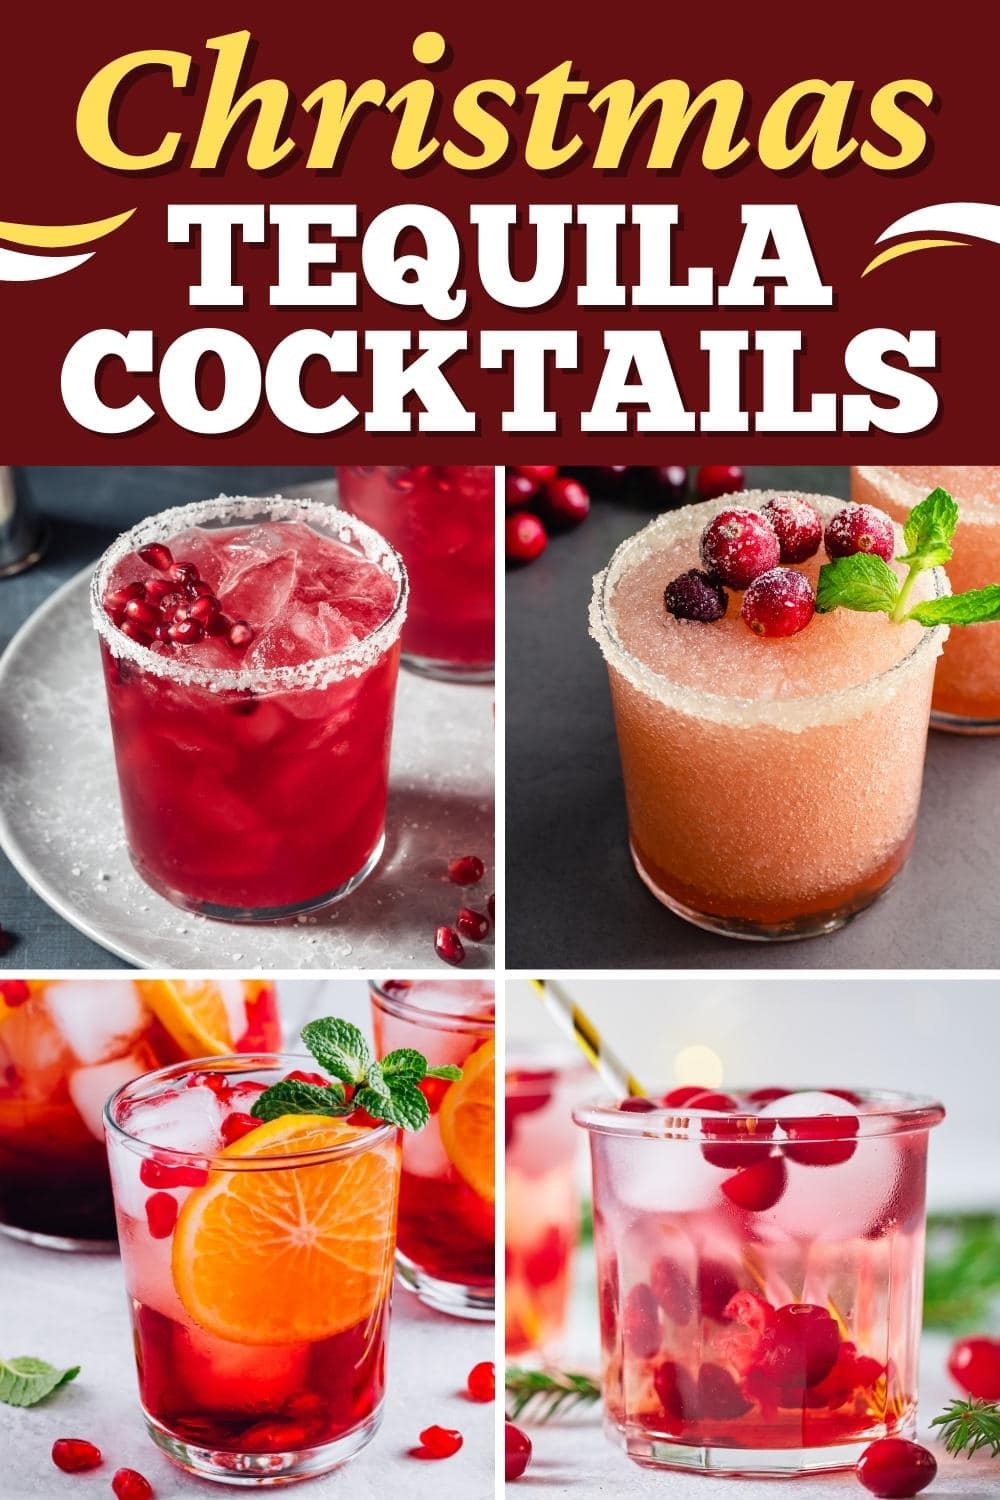 10 Festive Christmas Tequila Cocktails - Insanely Good